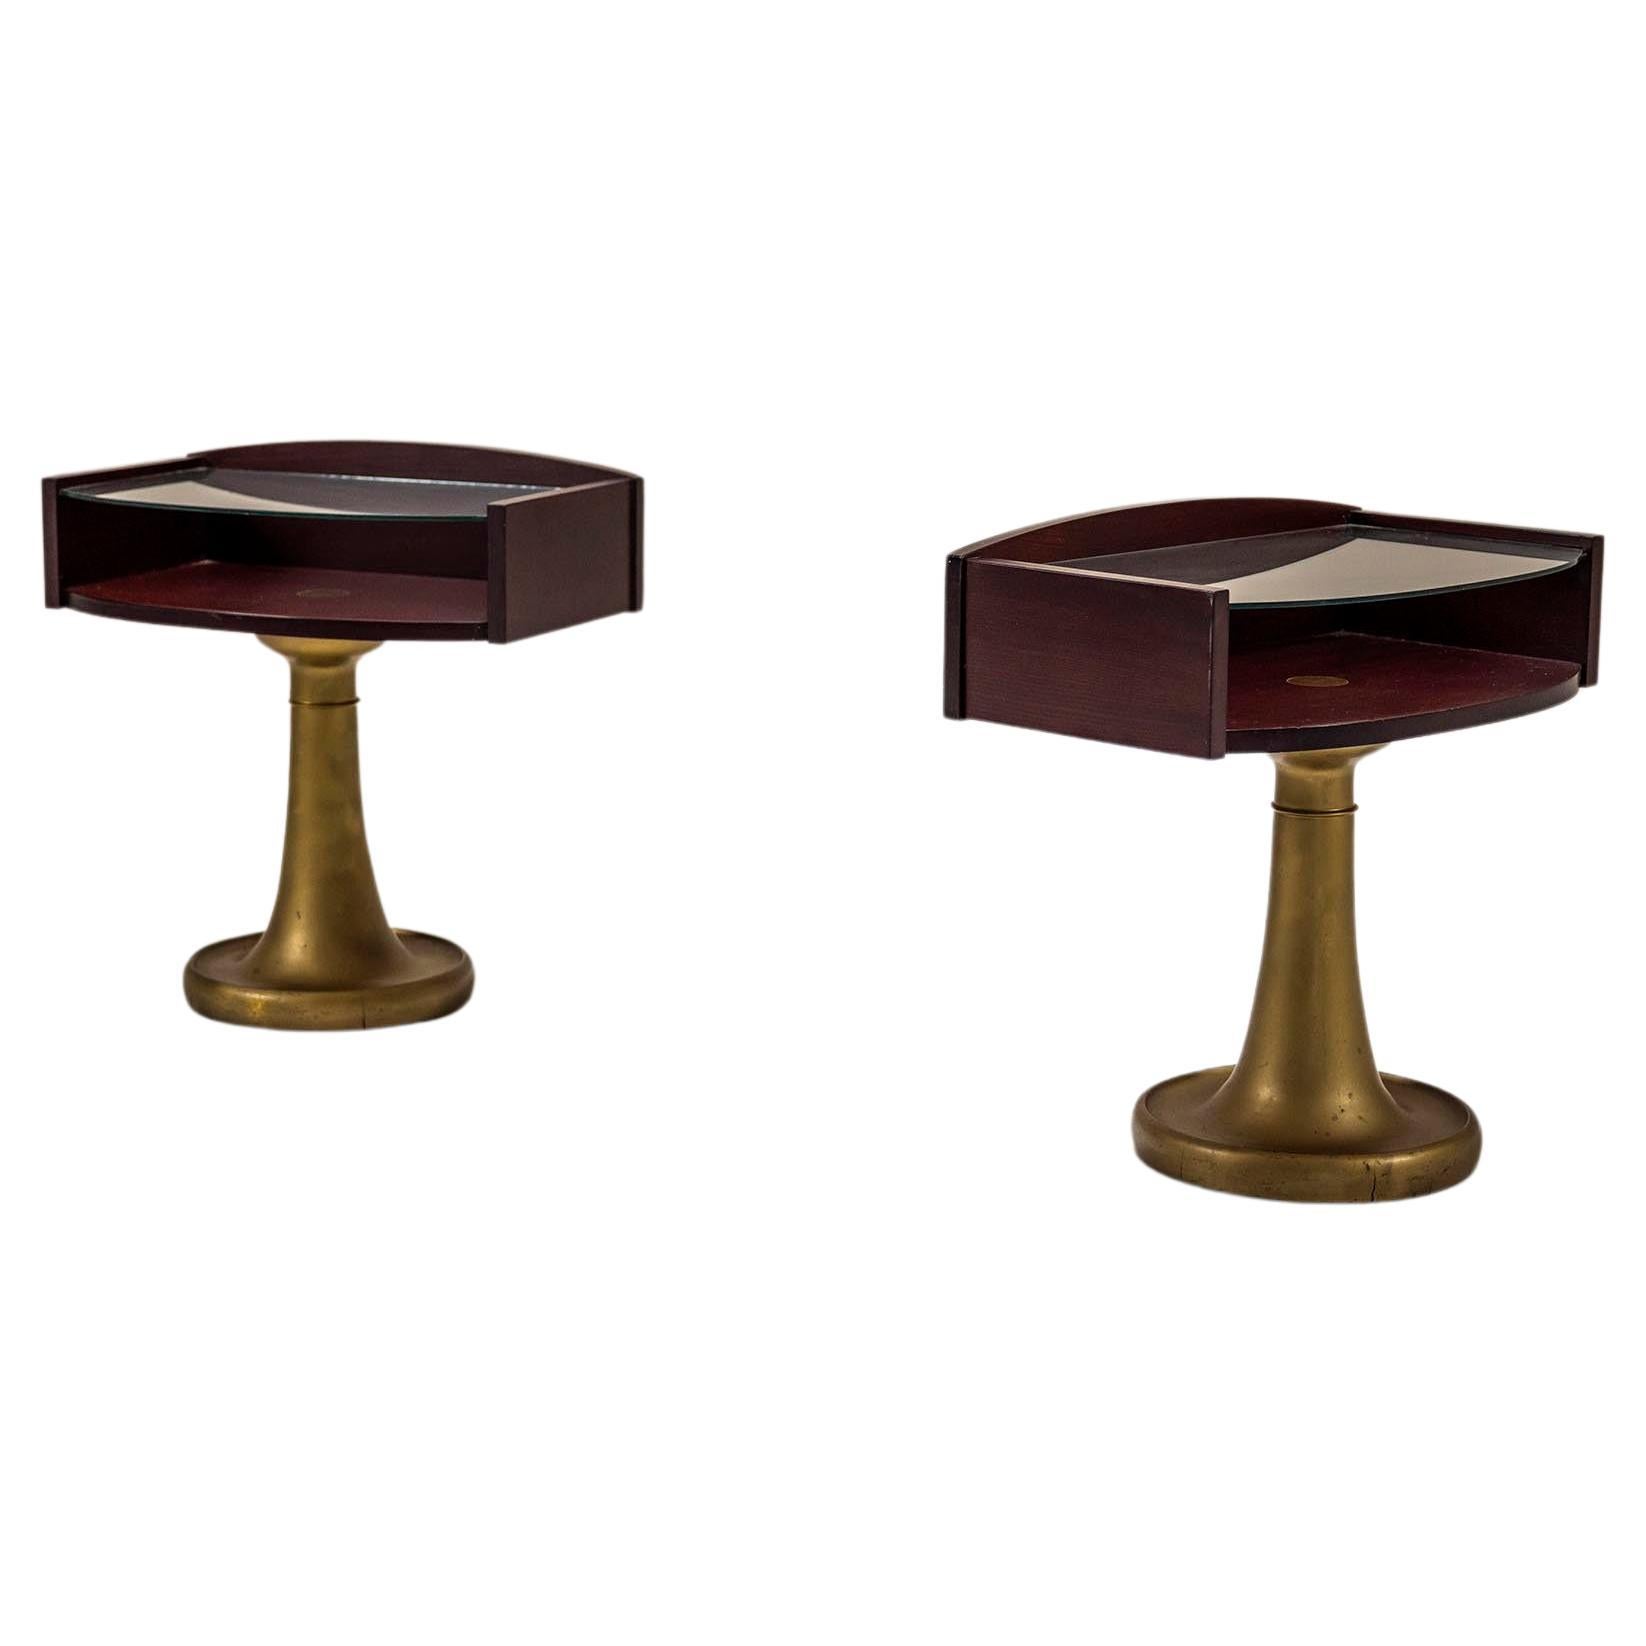 Set Of Ronchetti & Porro Nightstands In Glass And Stained Beech Veneer